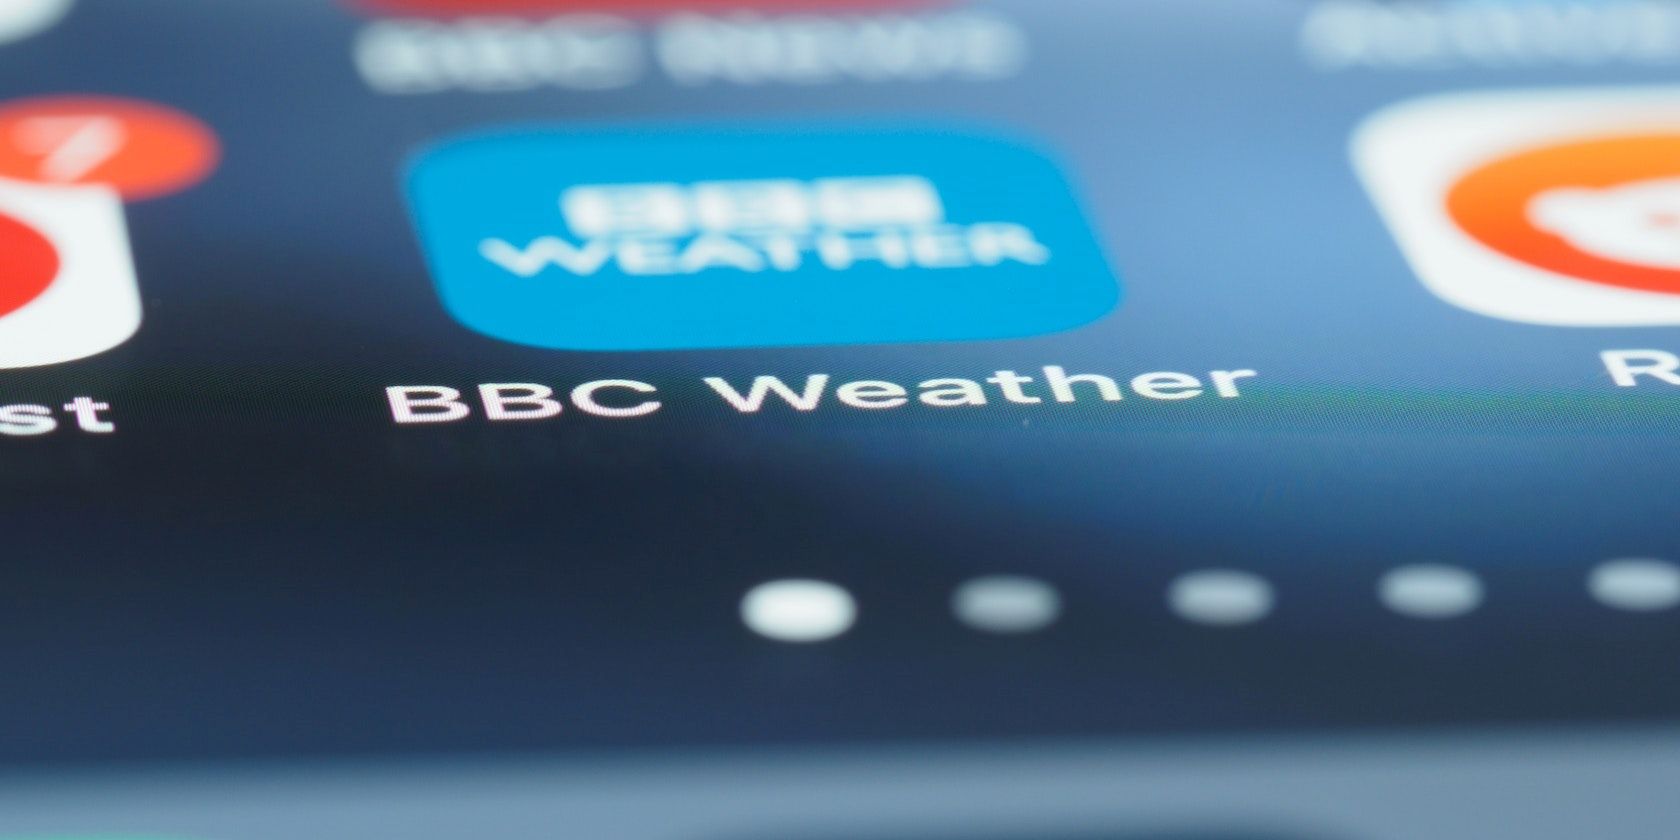 A picture of the BBC weather app on a screen